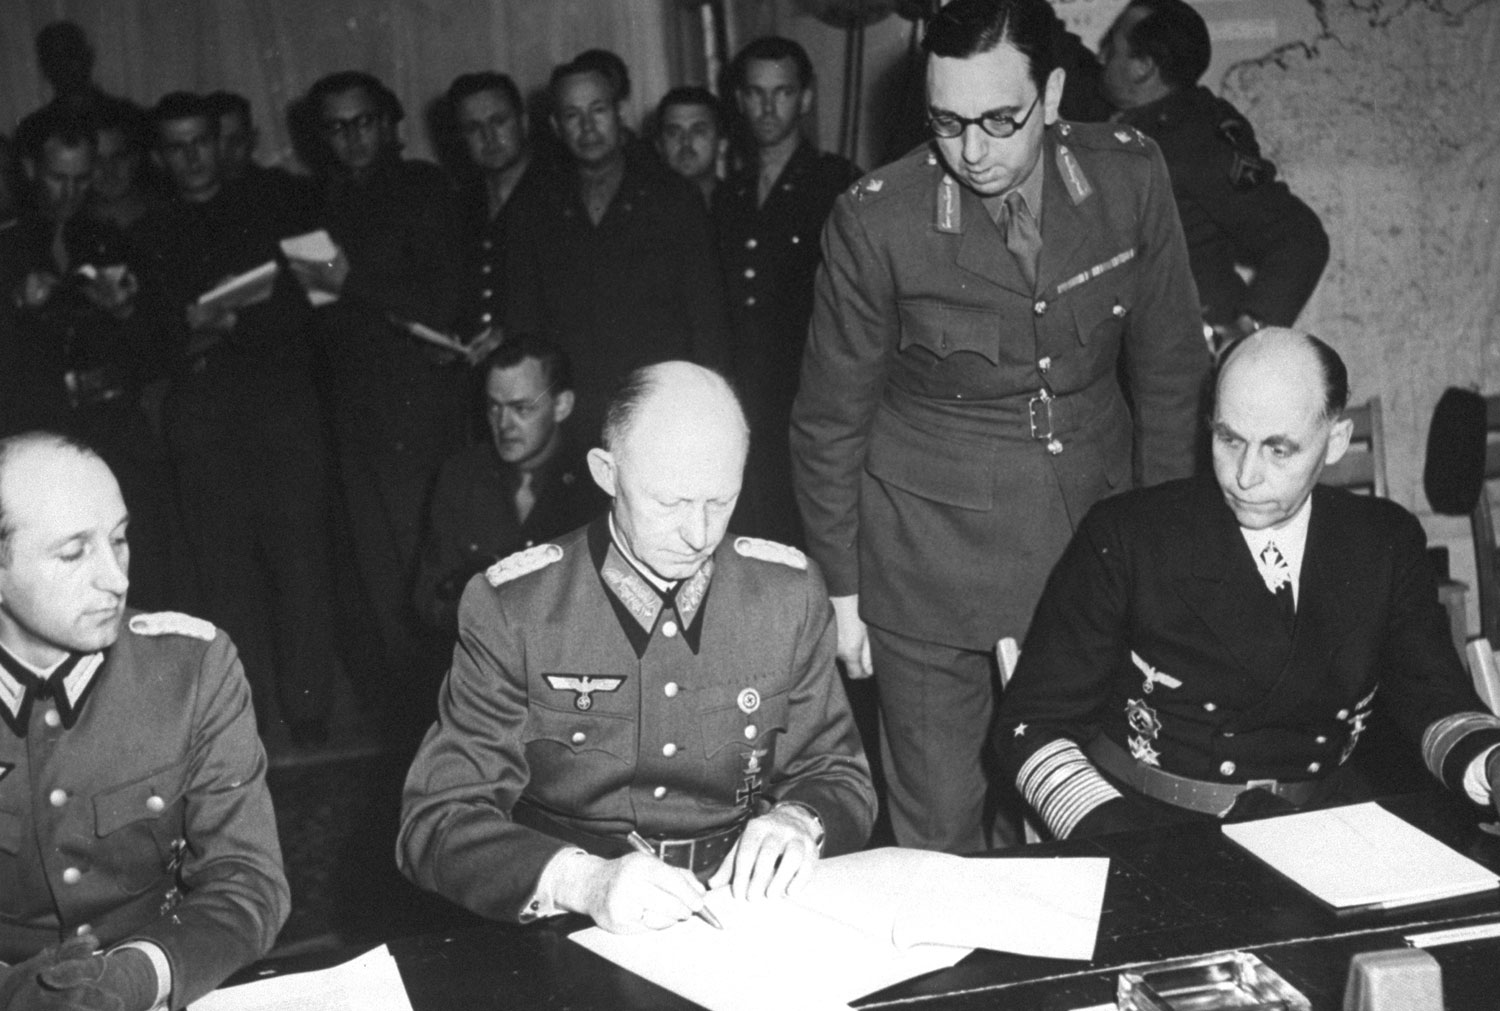 Jodl signing surrender documents at Eisenhower's headquarters, flanked by Major Wilhelm Oxenius and Admiral Hans-Georg von Friedeburg, Reims, France, 7 May 1945, photo 2 of 4